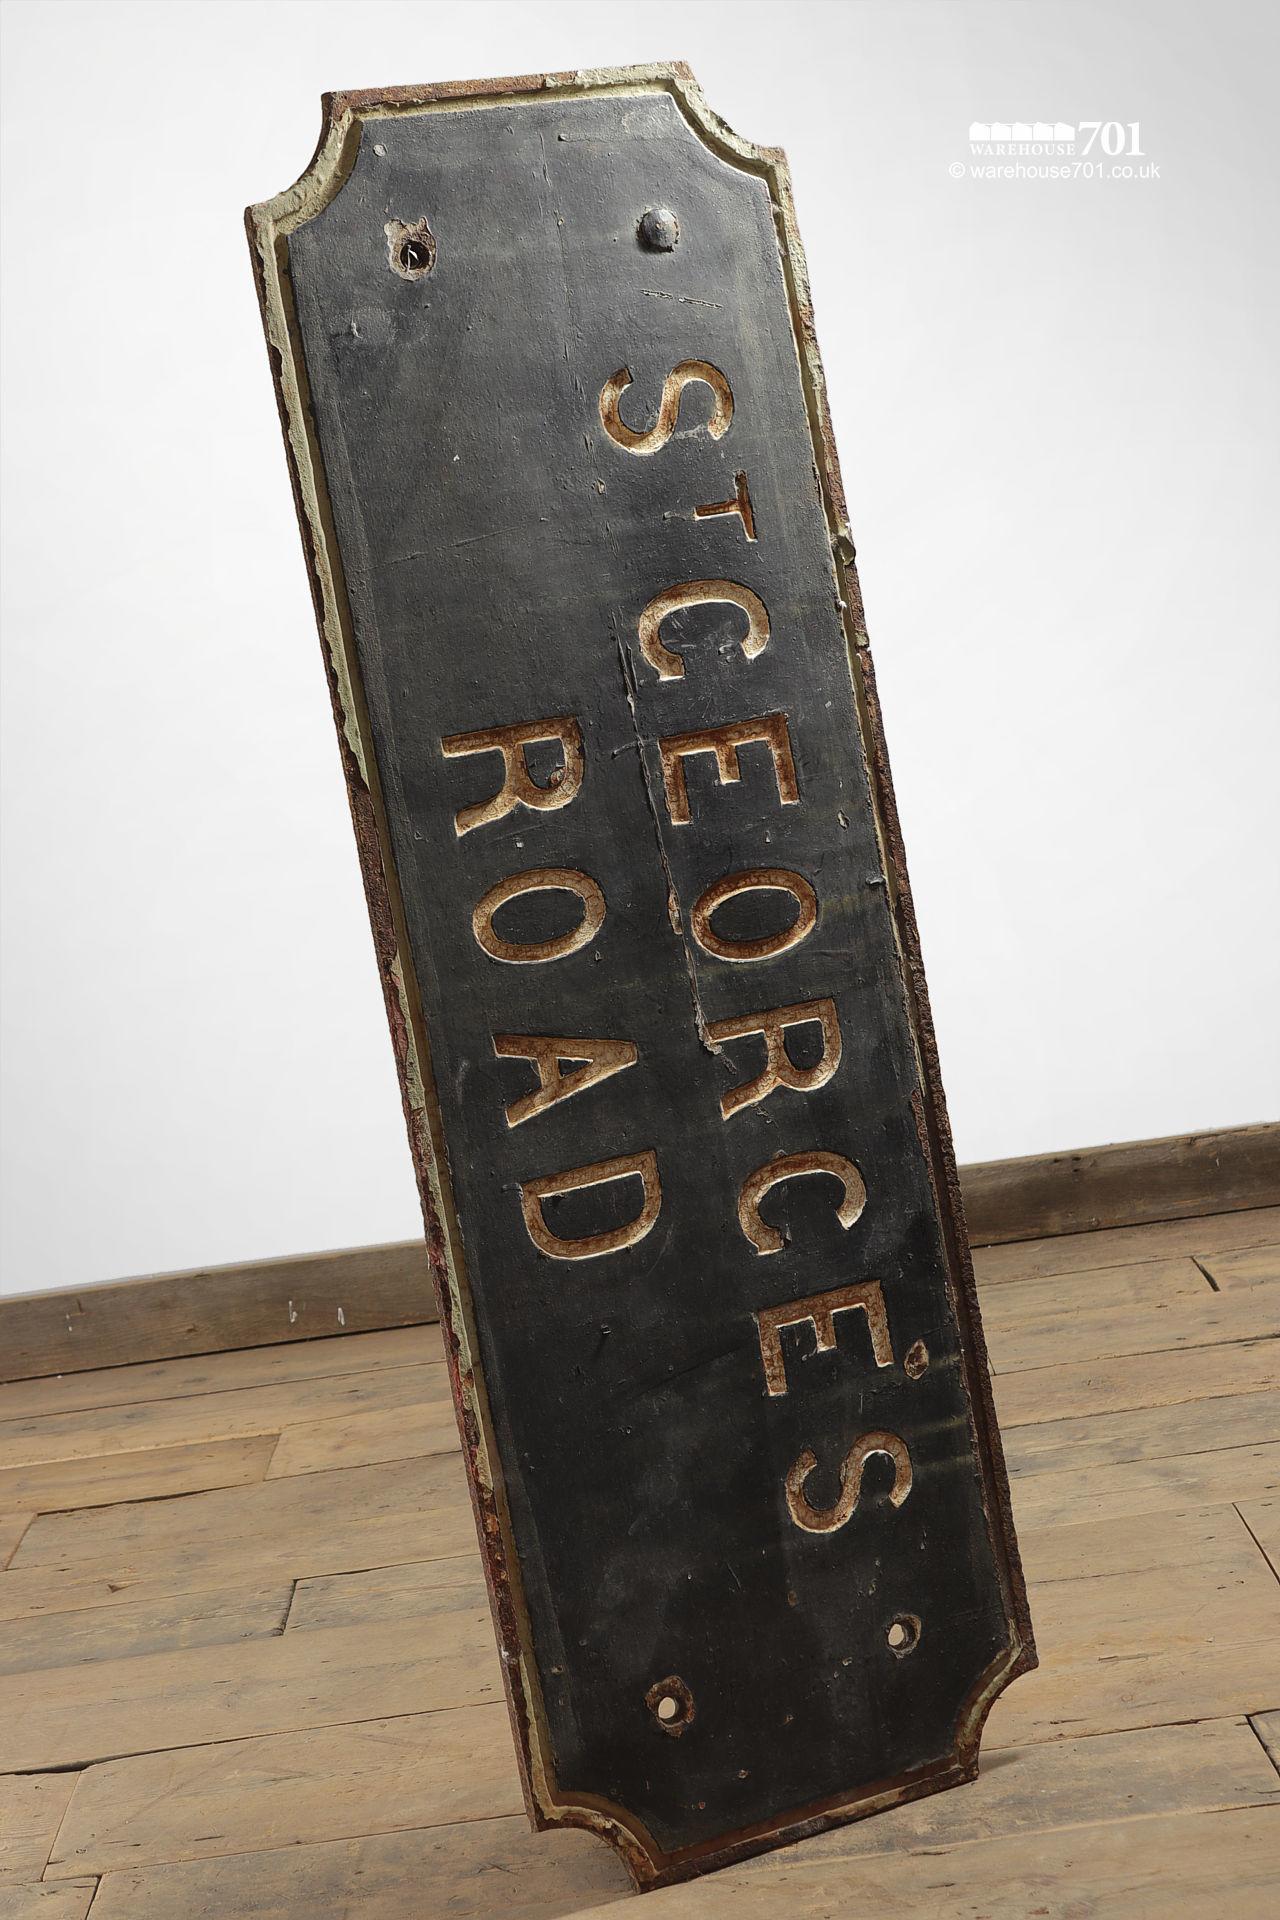 Lovely Old Cast Iron St Georges Road or Street Sign #1